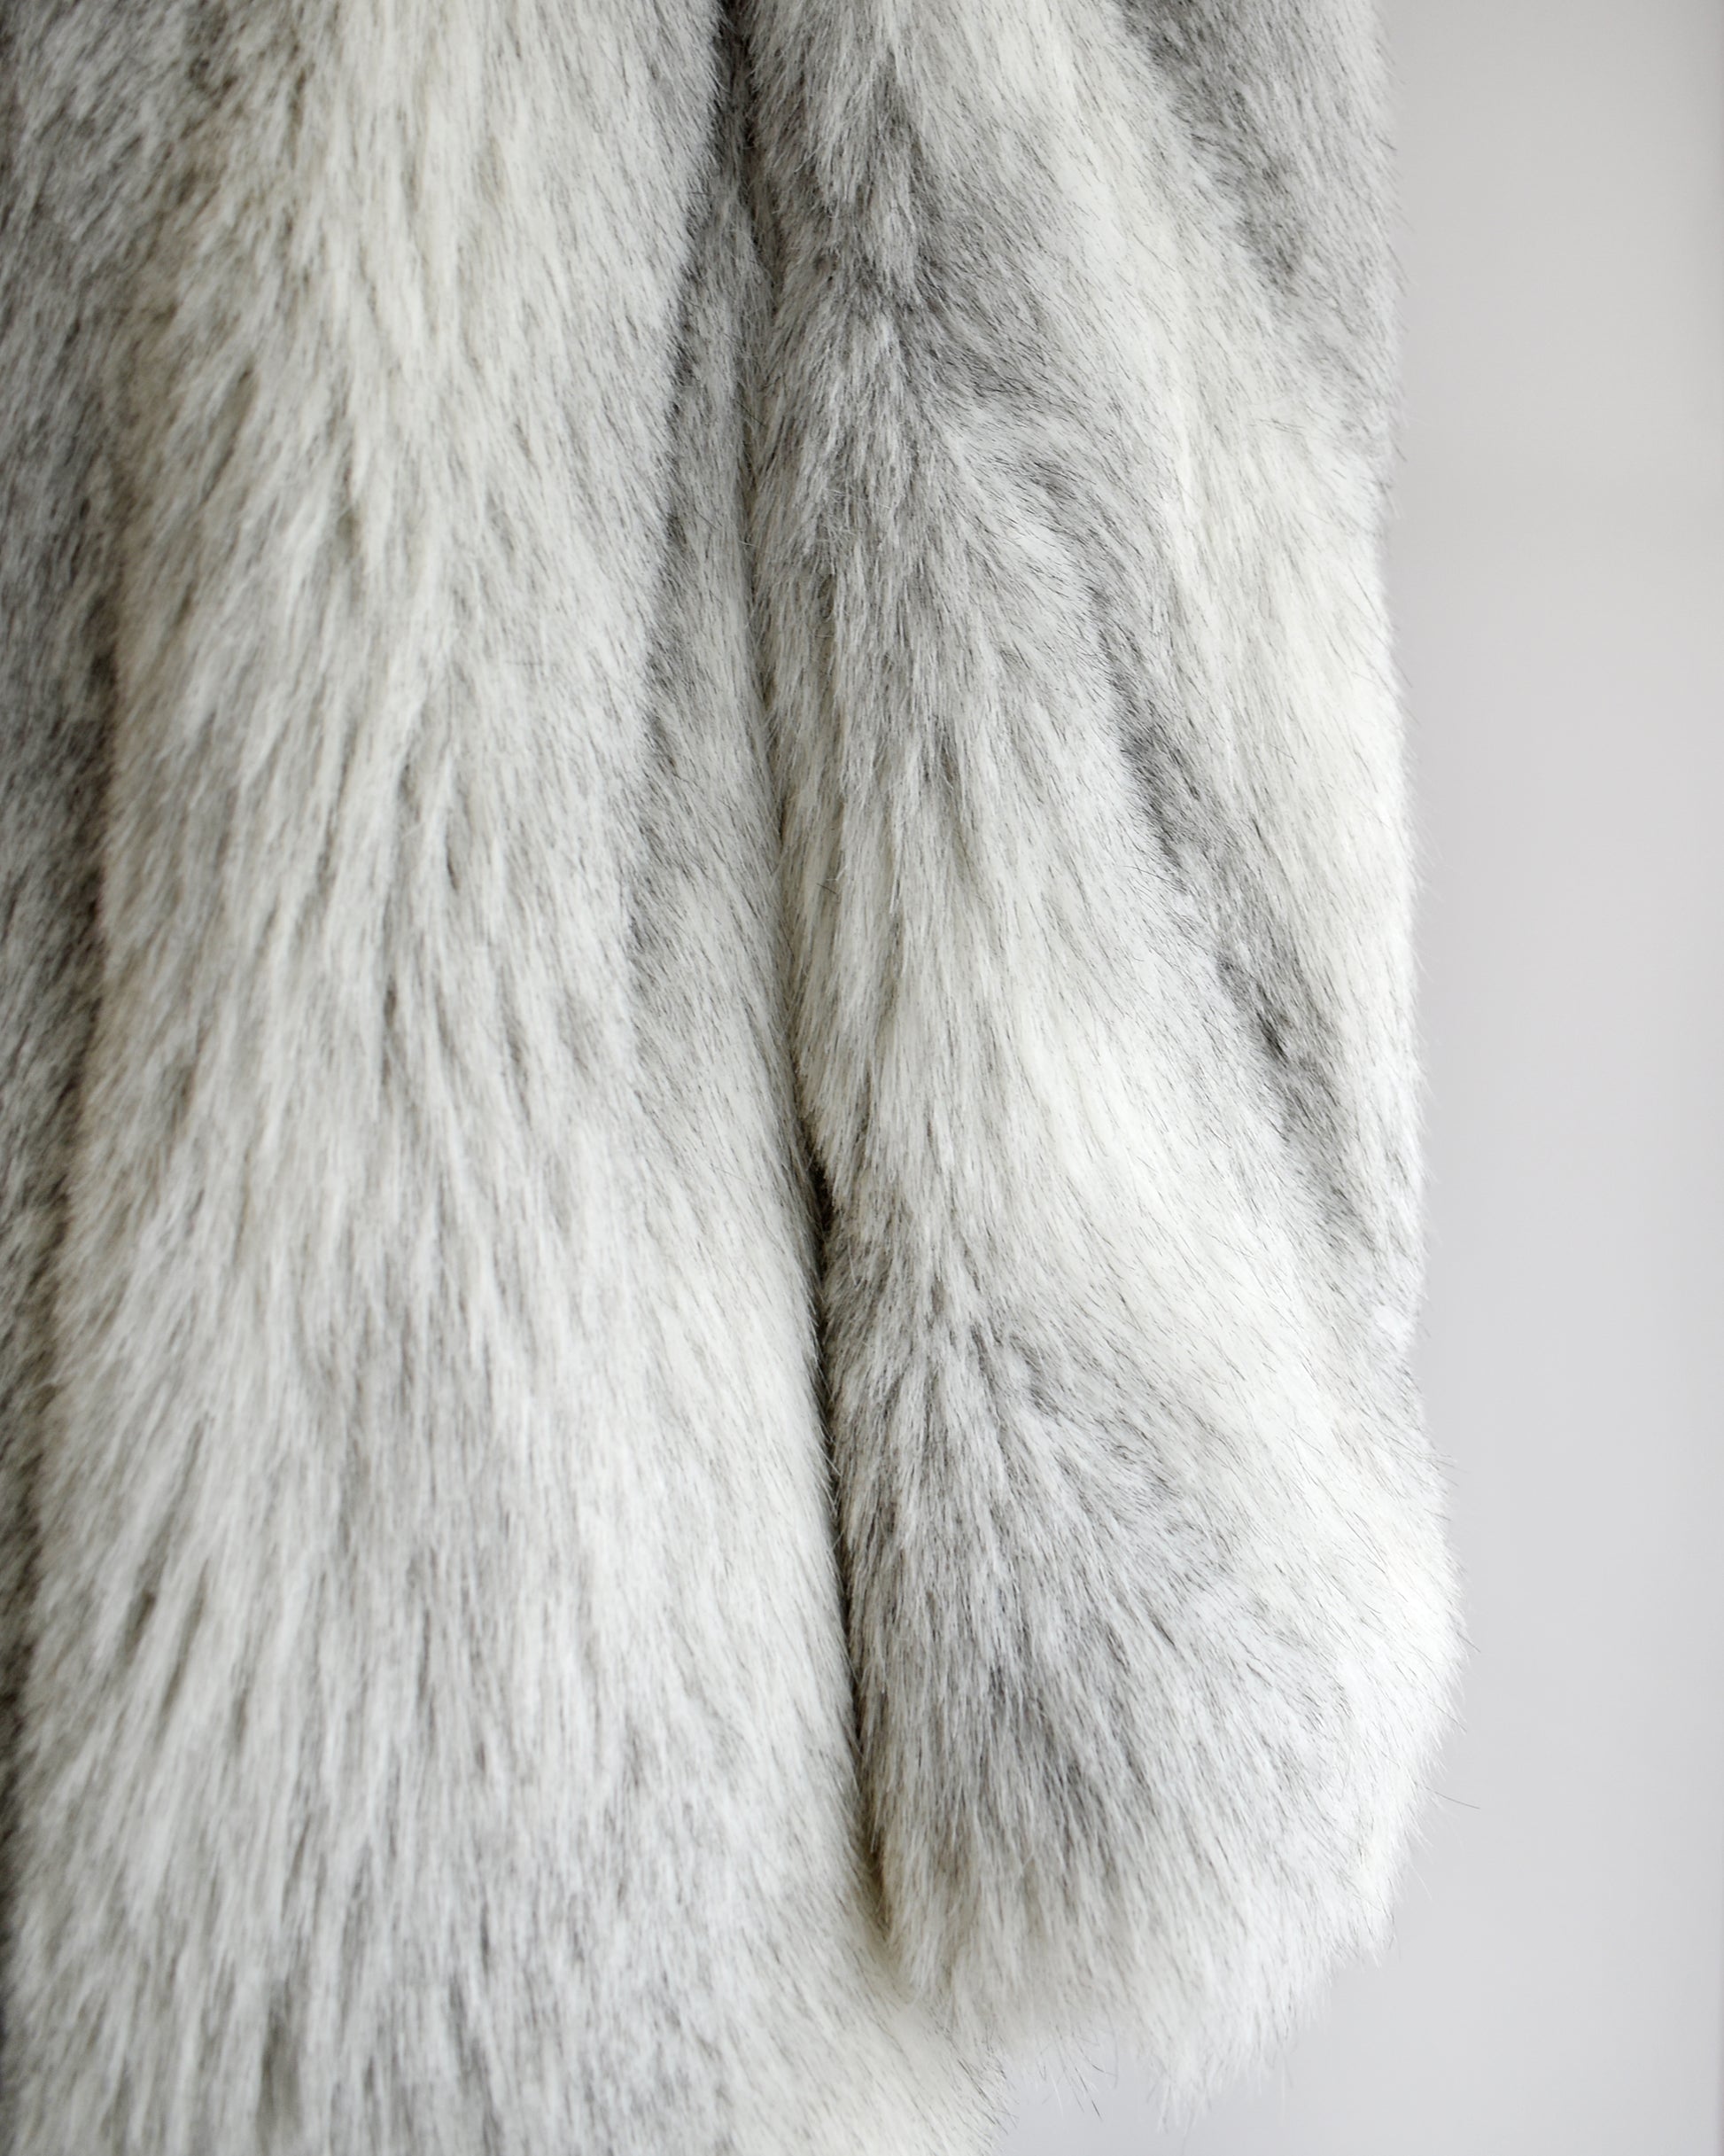 Close up of the sleeve, showing the faux fur texture and color